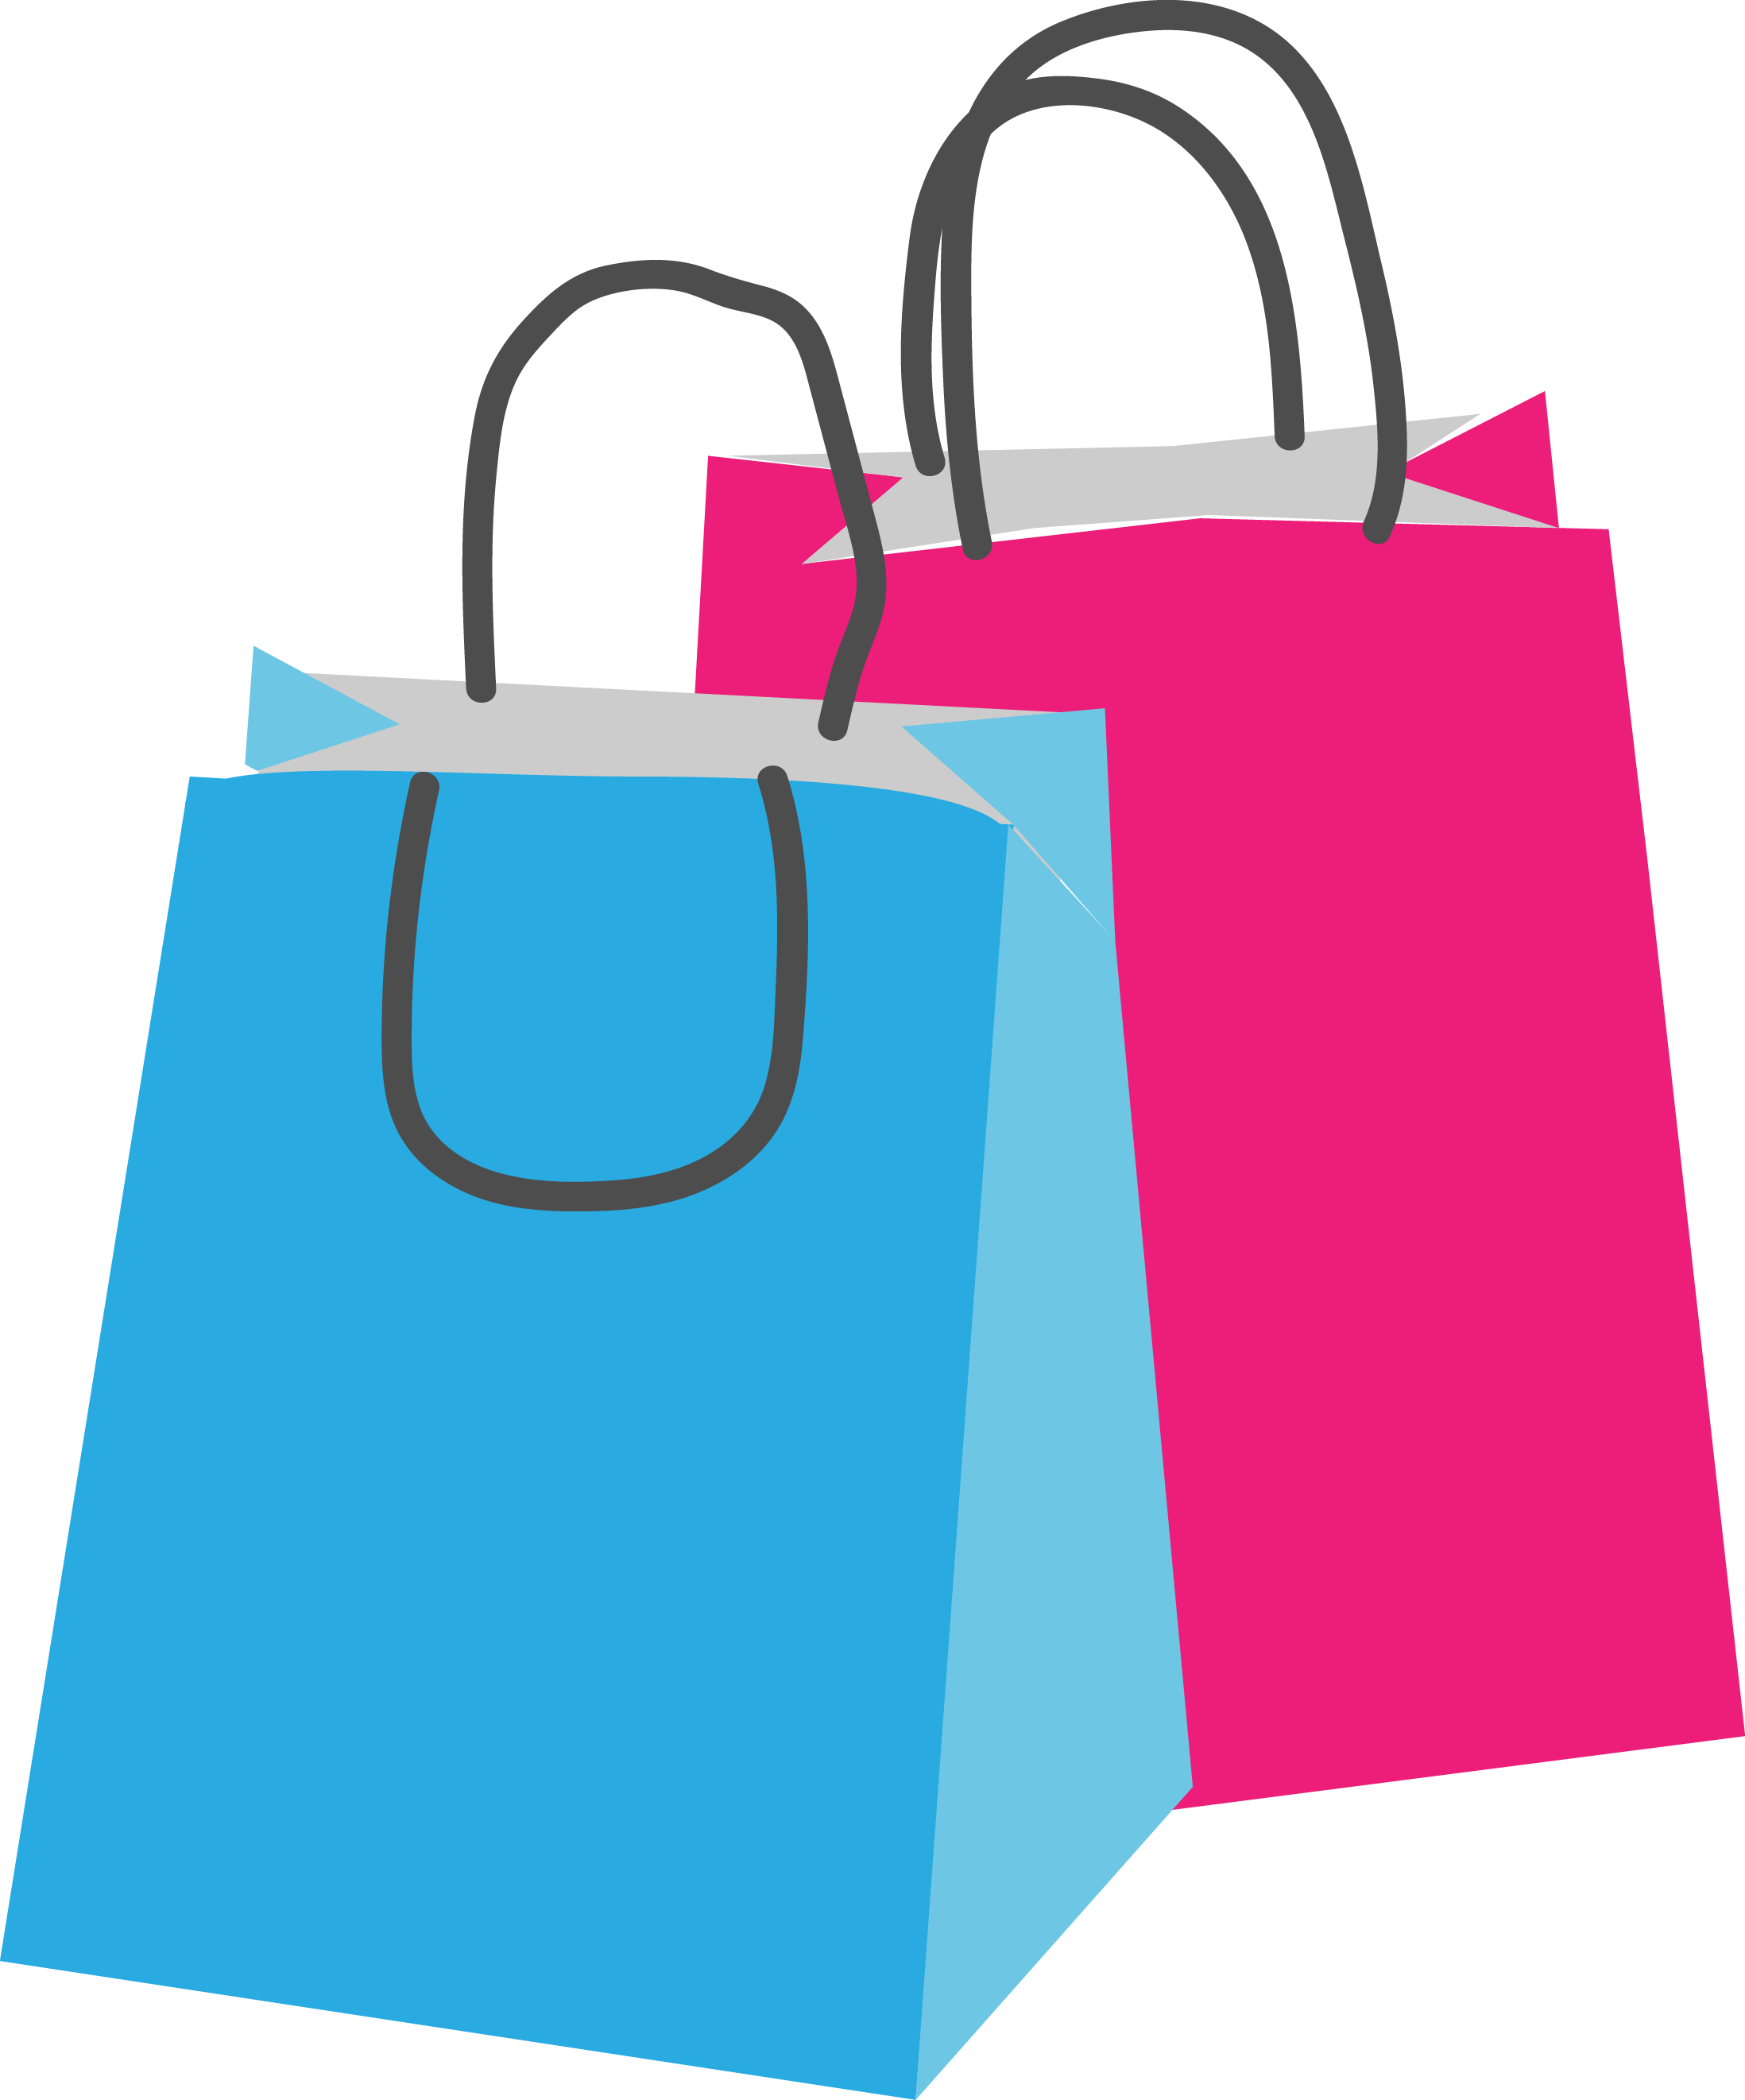 How to survive Black Friday shopping madness - The Daily Mississippian